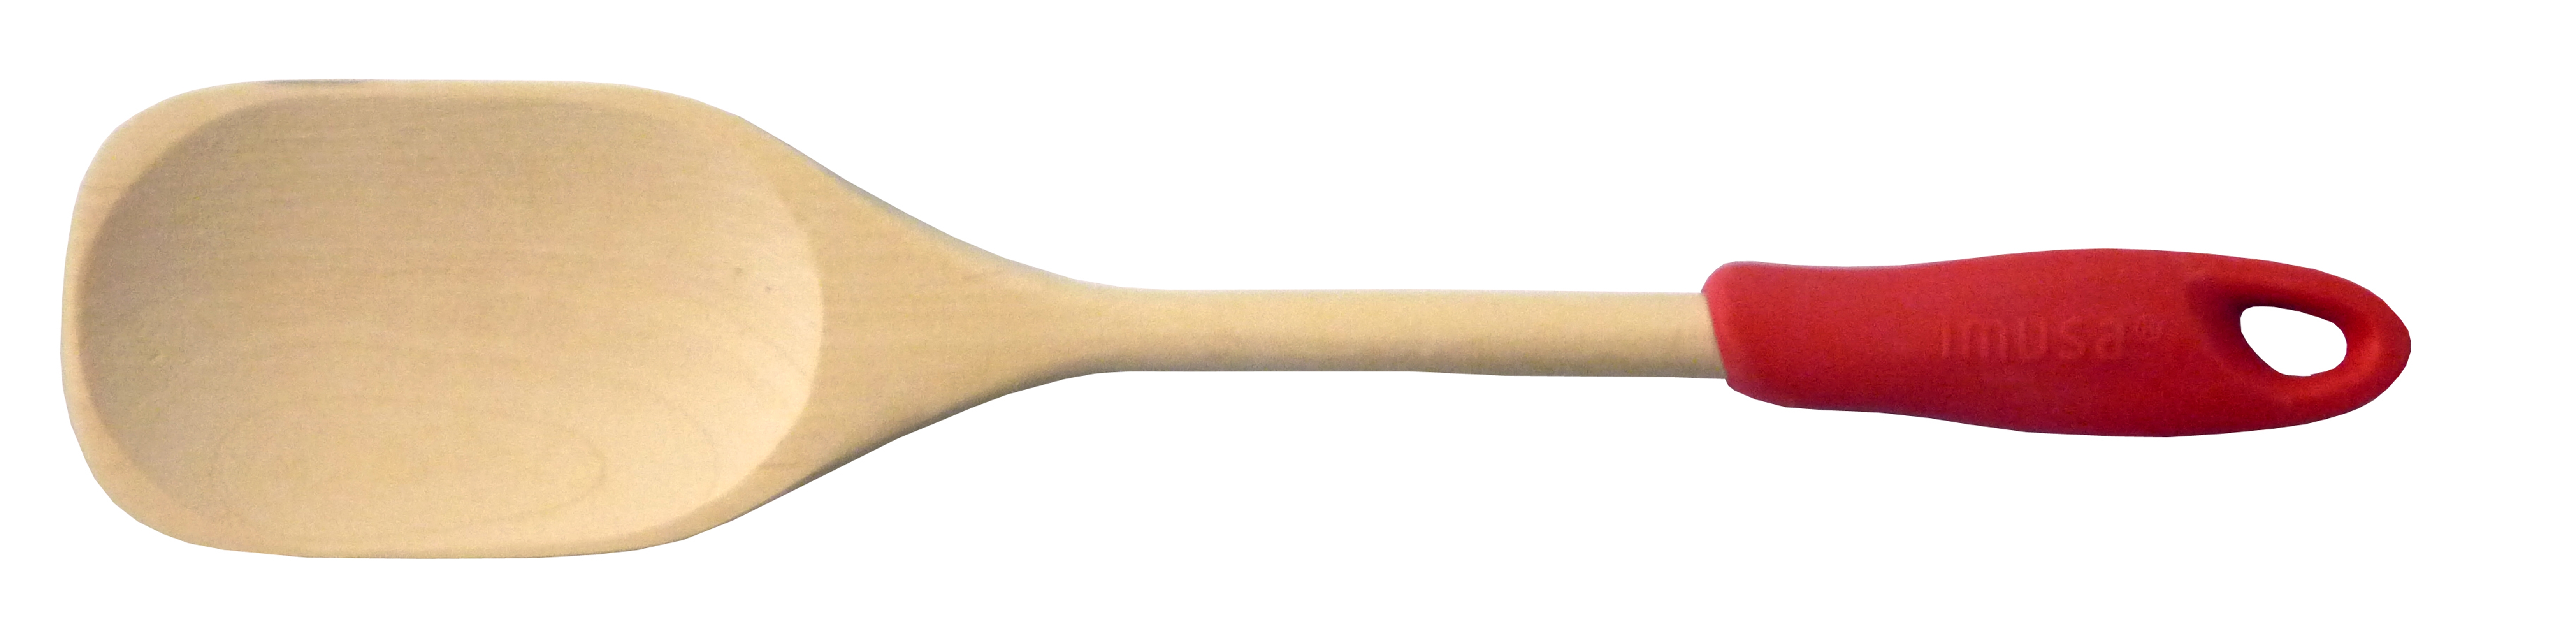 Imusa Wood 12" Serving Spoon - Small